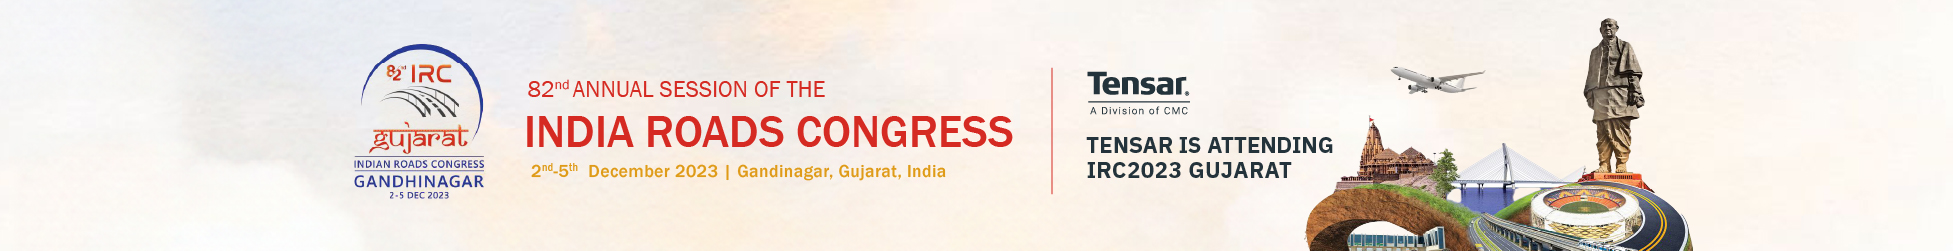 Image of 82nd Annual Session of the Indian Roads Congress (IRC2023)